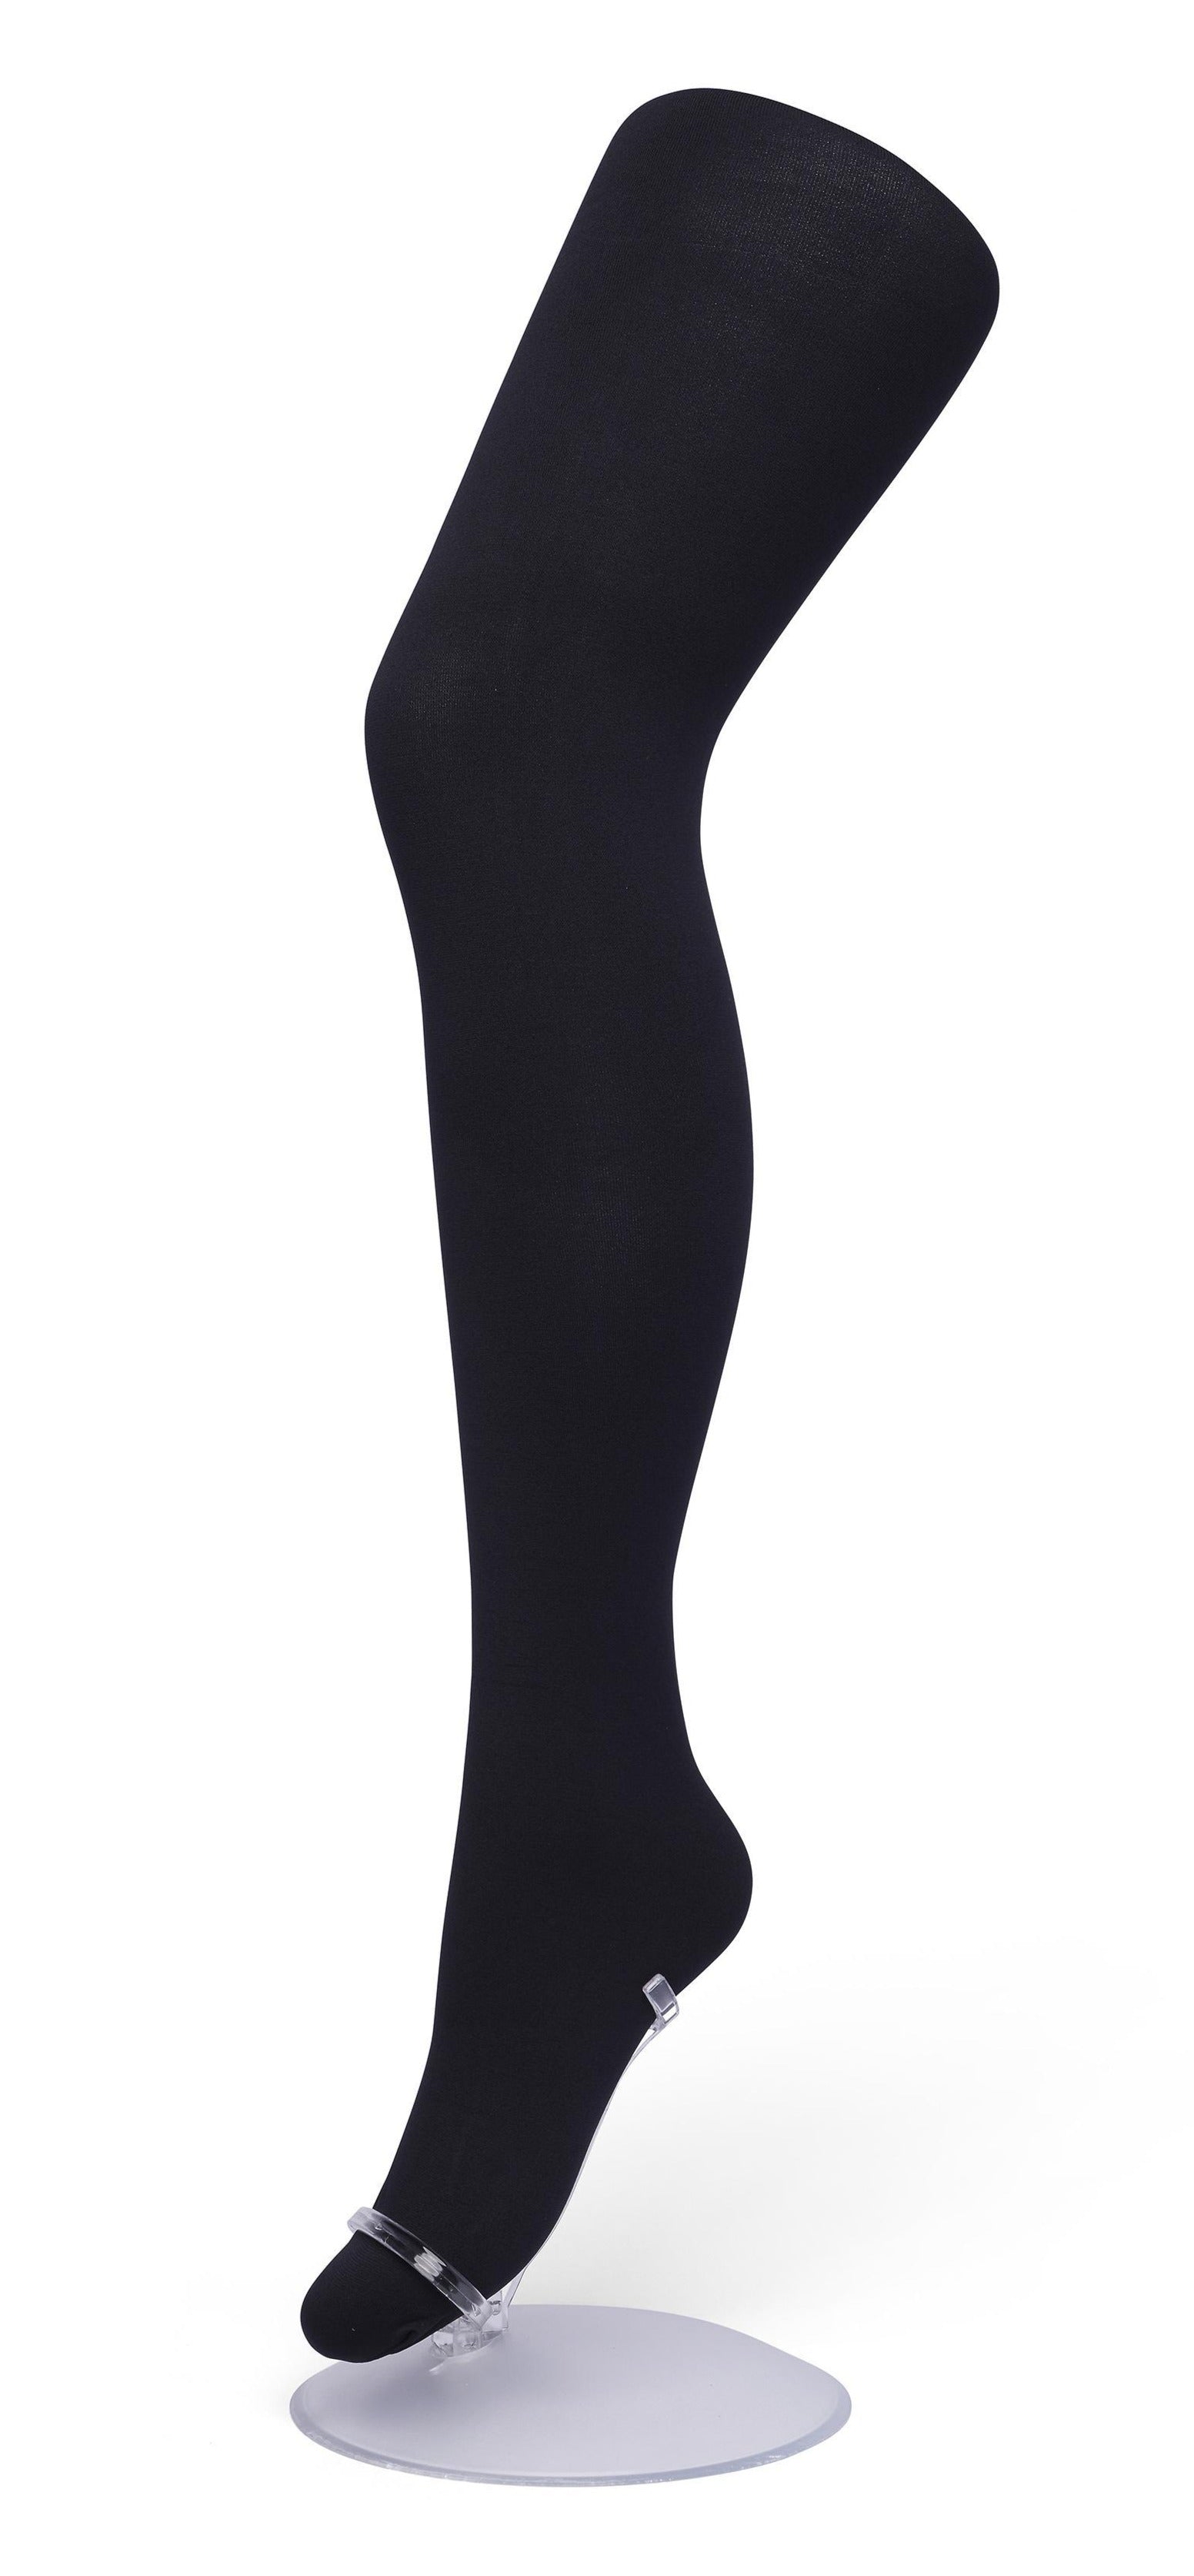 Bonnie Doon BN161912 Comfort Tights XXL - Black 70 denier soft opaque plus size tights with an extra panel in the body, extra deep waistband and flat seams.